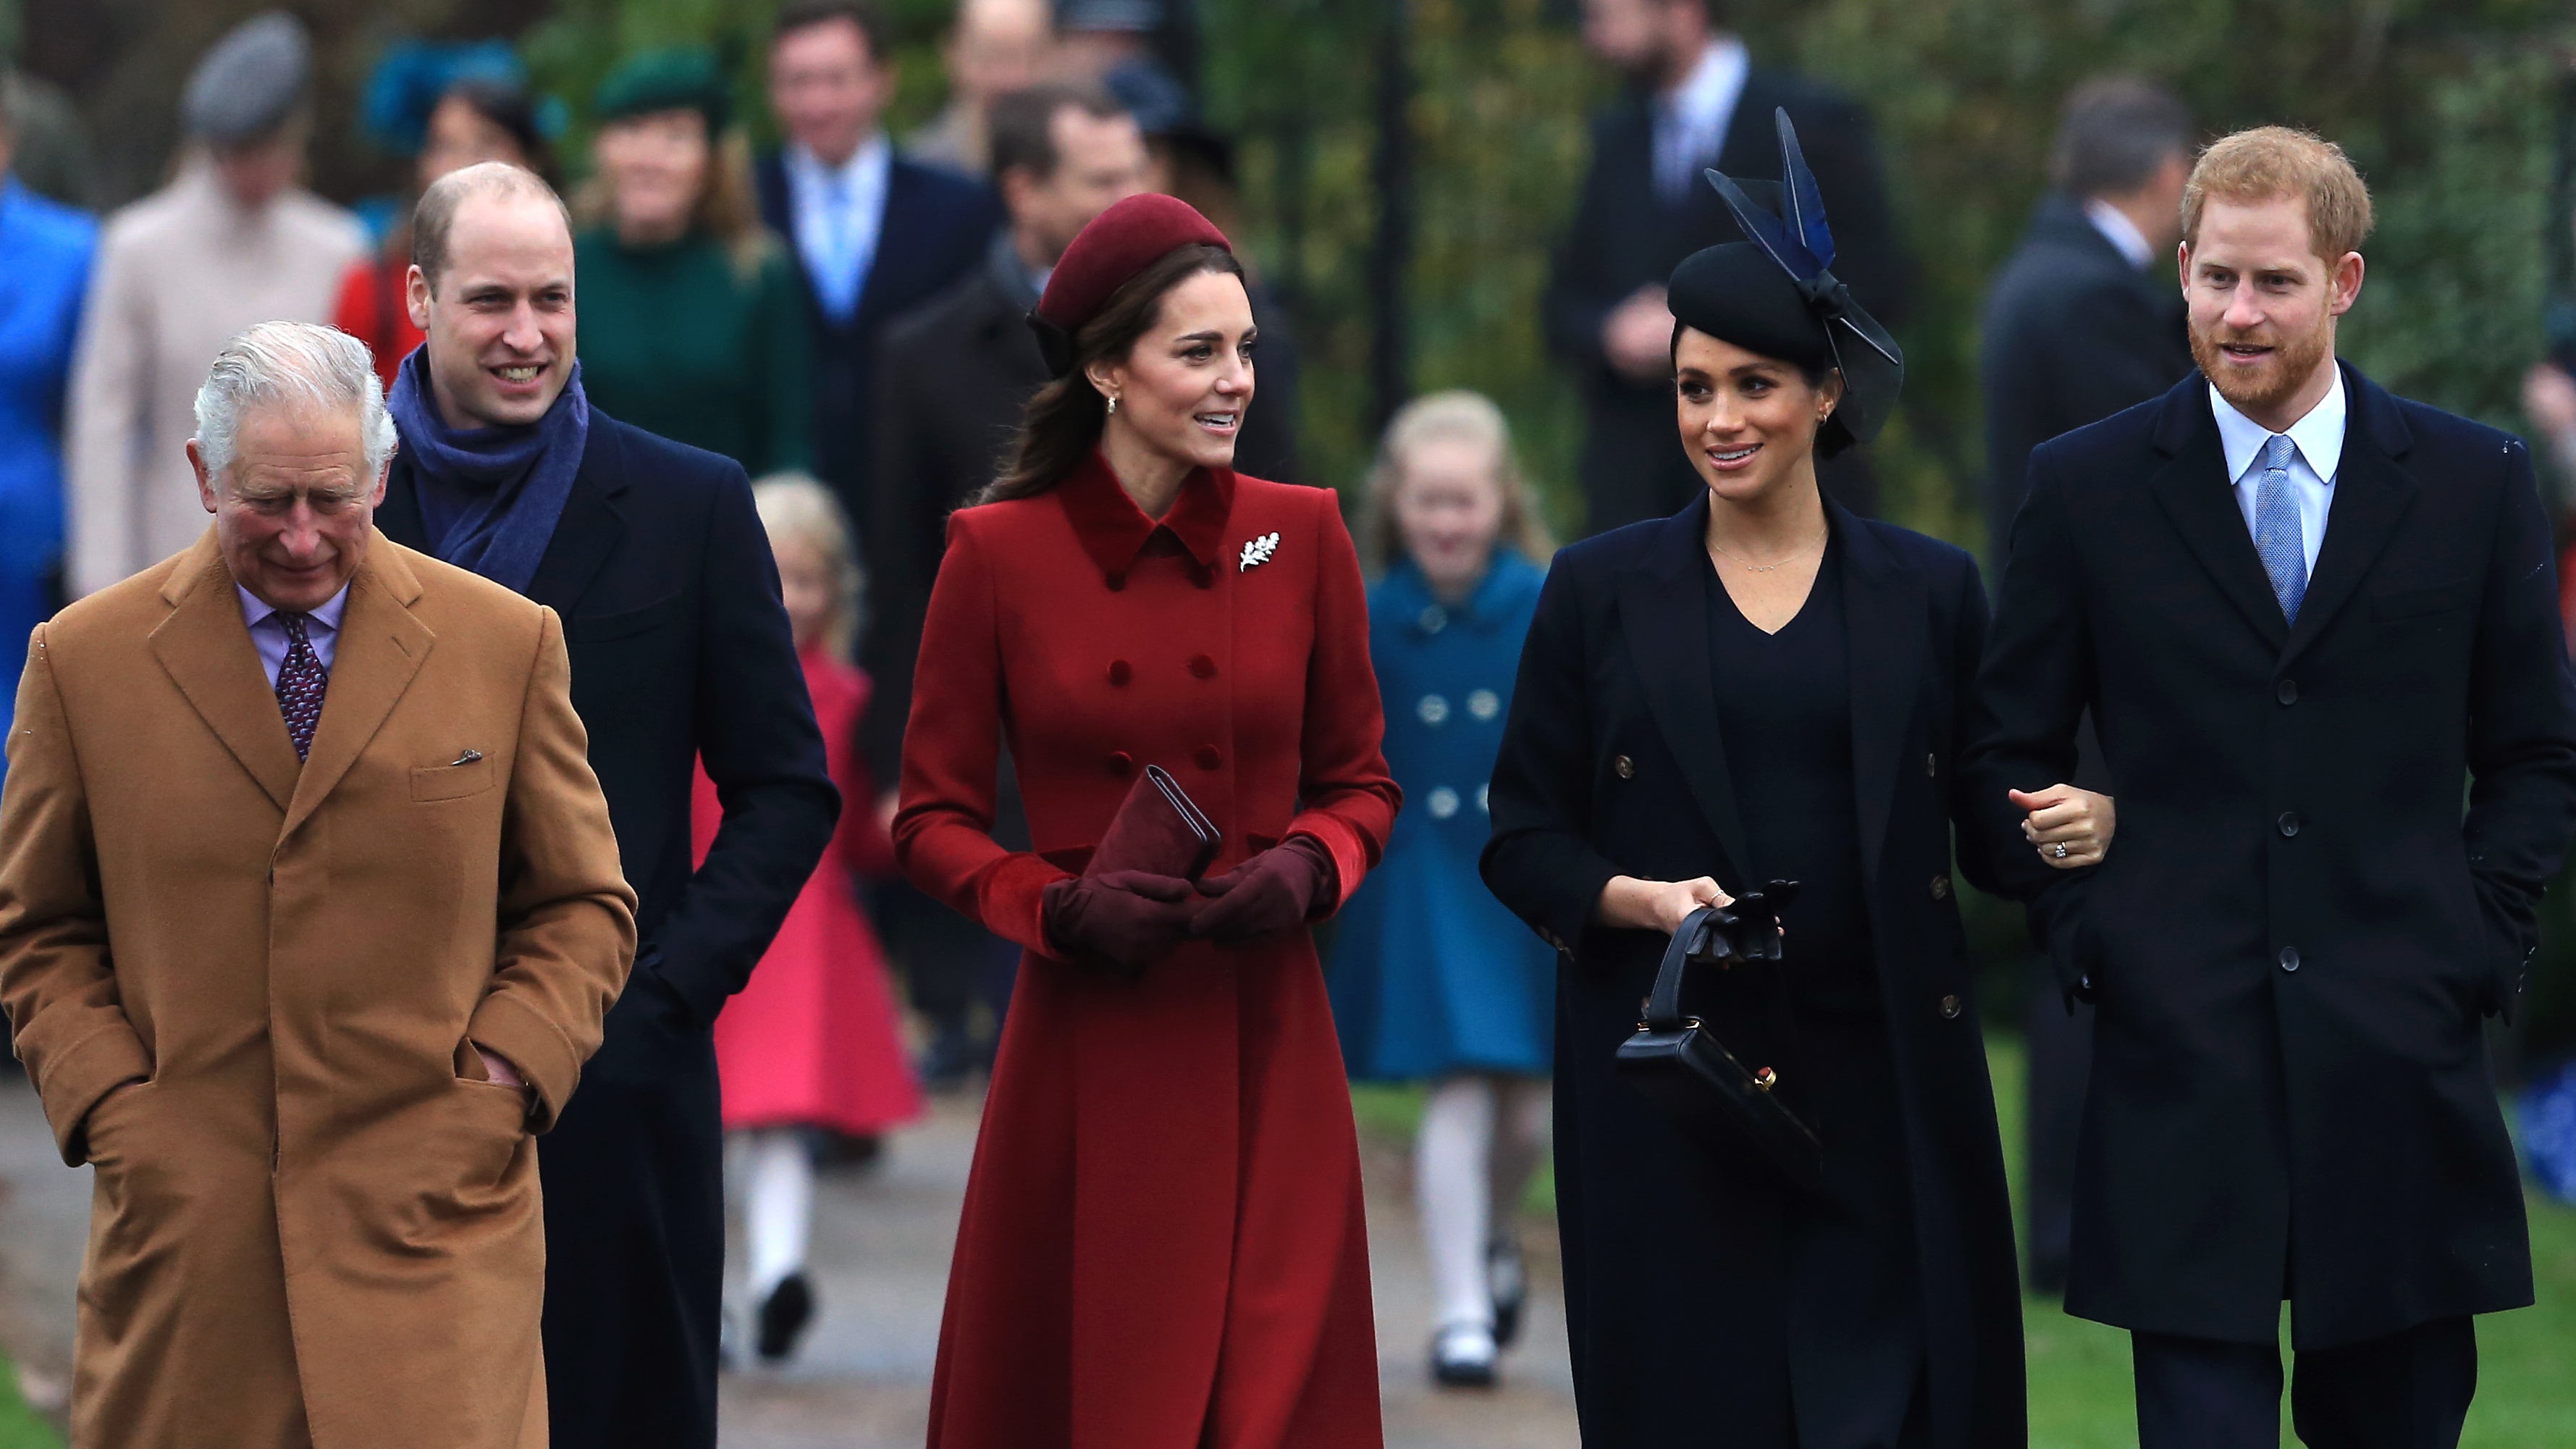 The royal family attends church on Christmas Day 2018